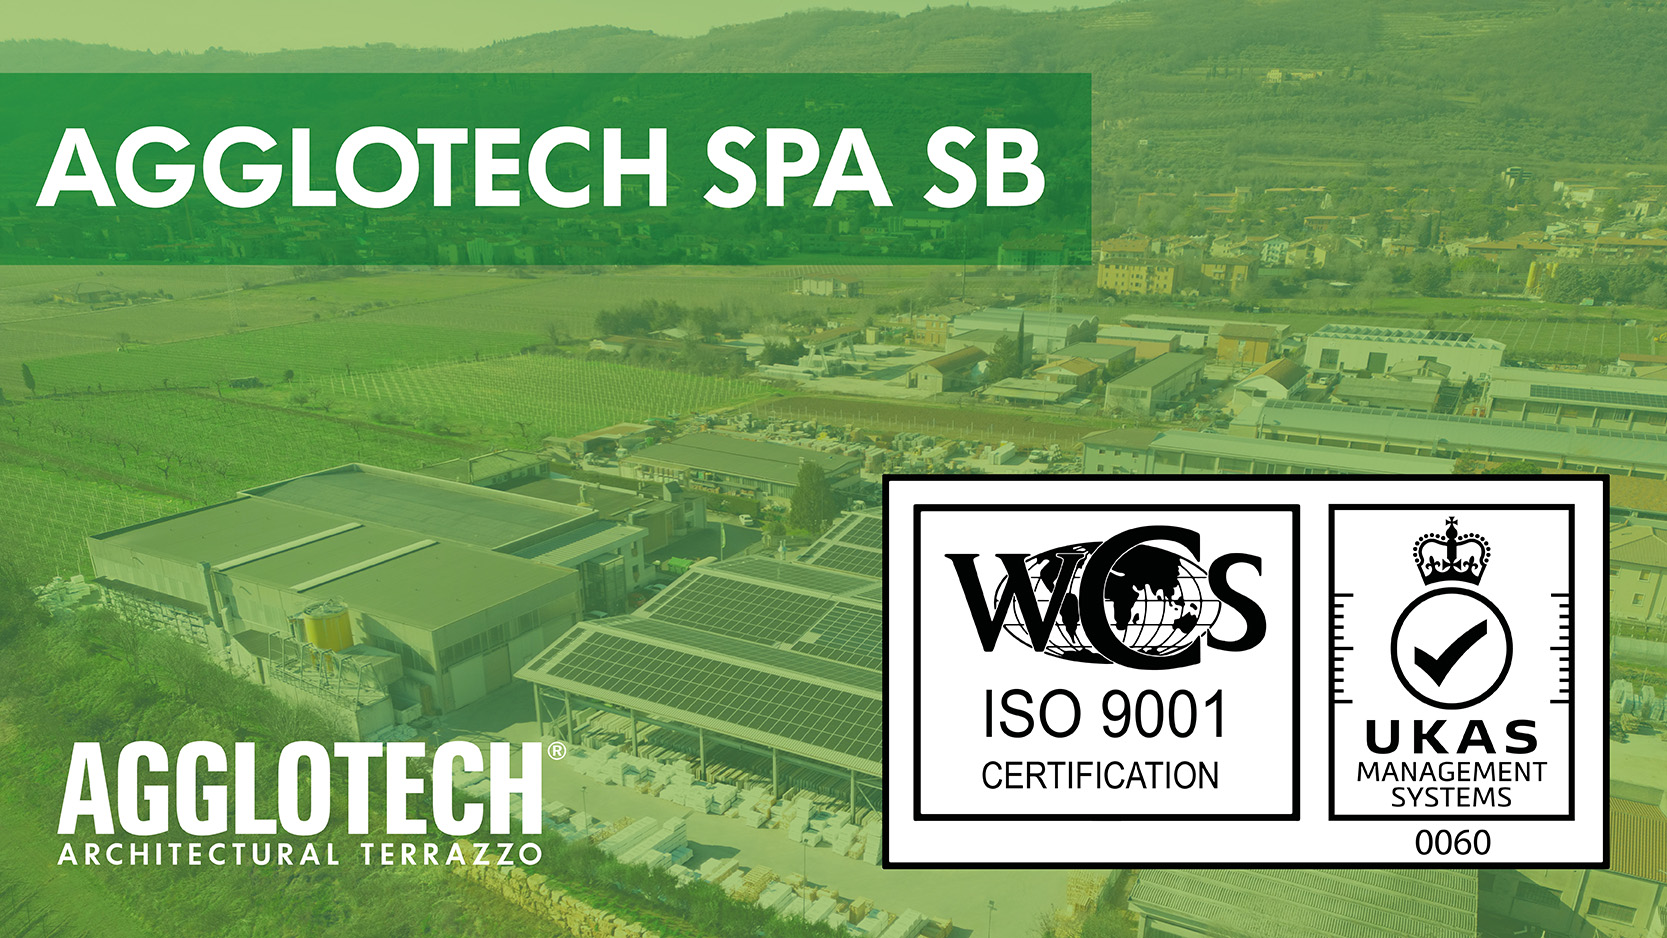 Agglotech SPA SB obtains ISO 9001:2015 certification